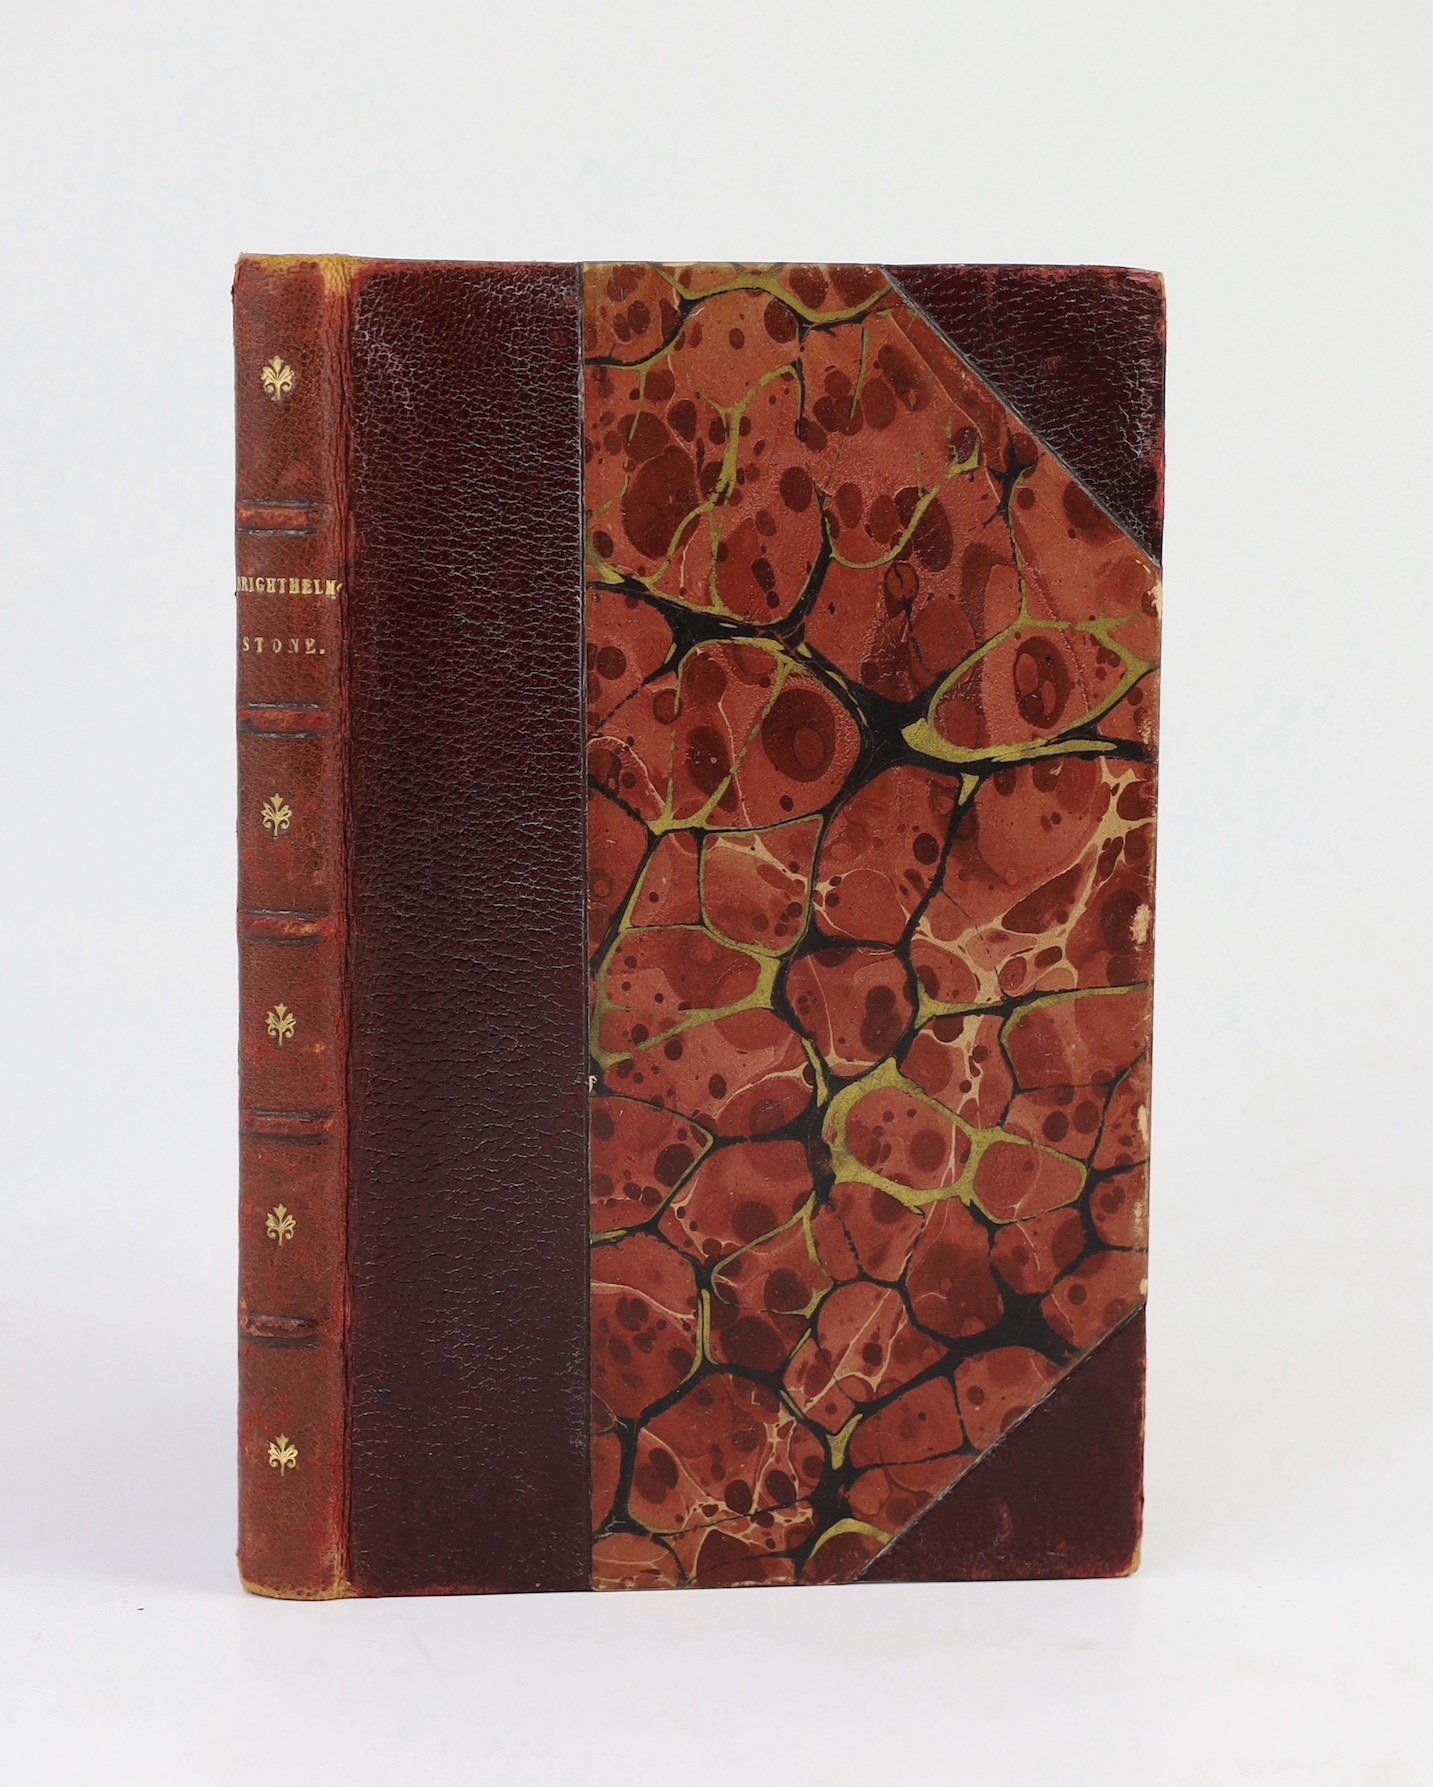 BRIGHTON: Brighton New Guide; or, a Description of Brighthelmston, and the Adjacent Country ... 3rd edition, pictorial engraved and printed titles; later 19th cent. maroon half morocco and marbled boards, gilt-decorated